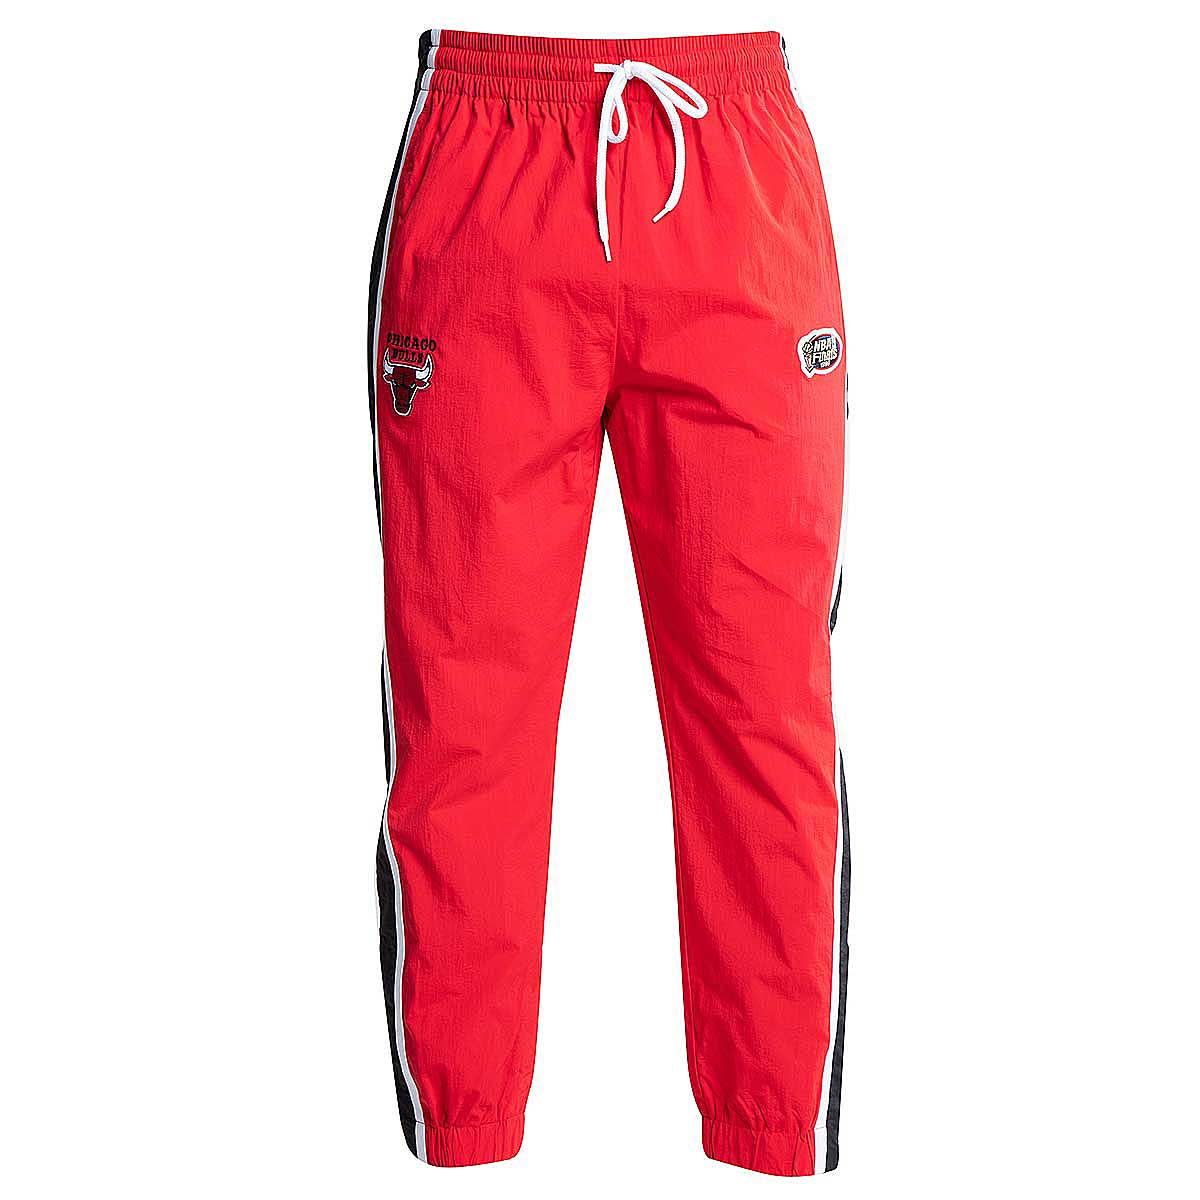 https://www.kickz.com/on/demandware.static/-/Sites-kickz-master-catalog/default/dwd0471532/images/large/mitchell_and_ness-NBA_Lifestyle_Tear_Away_Pants_CHICAGO_BULLS-RED_RED-1.jpg